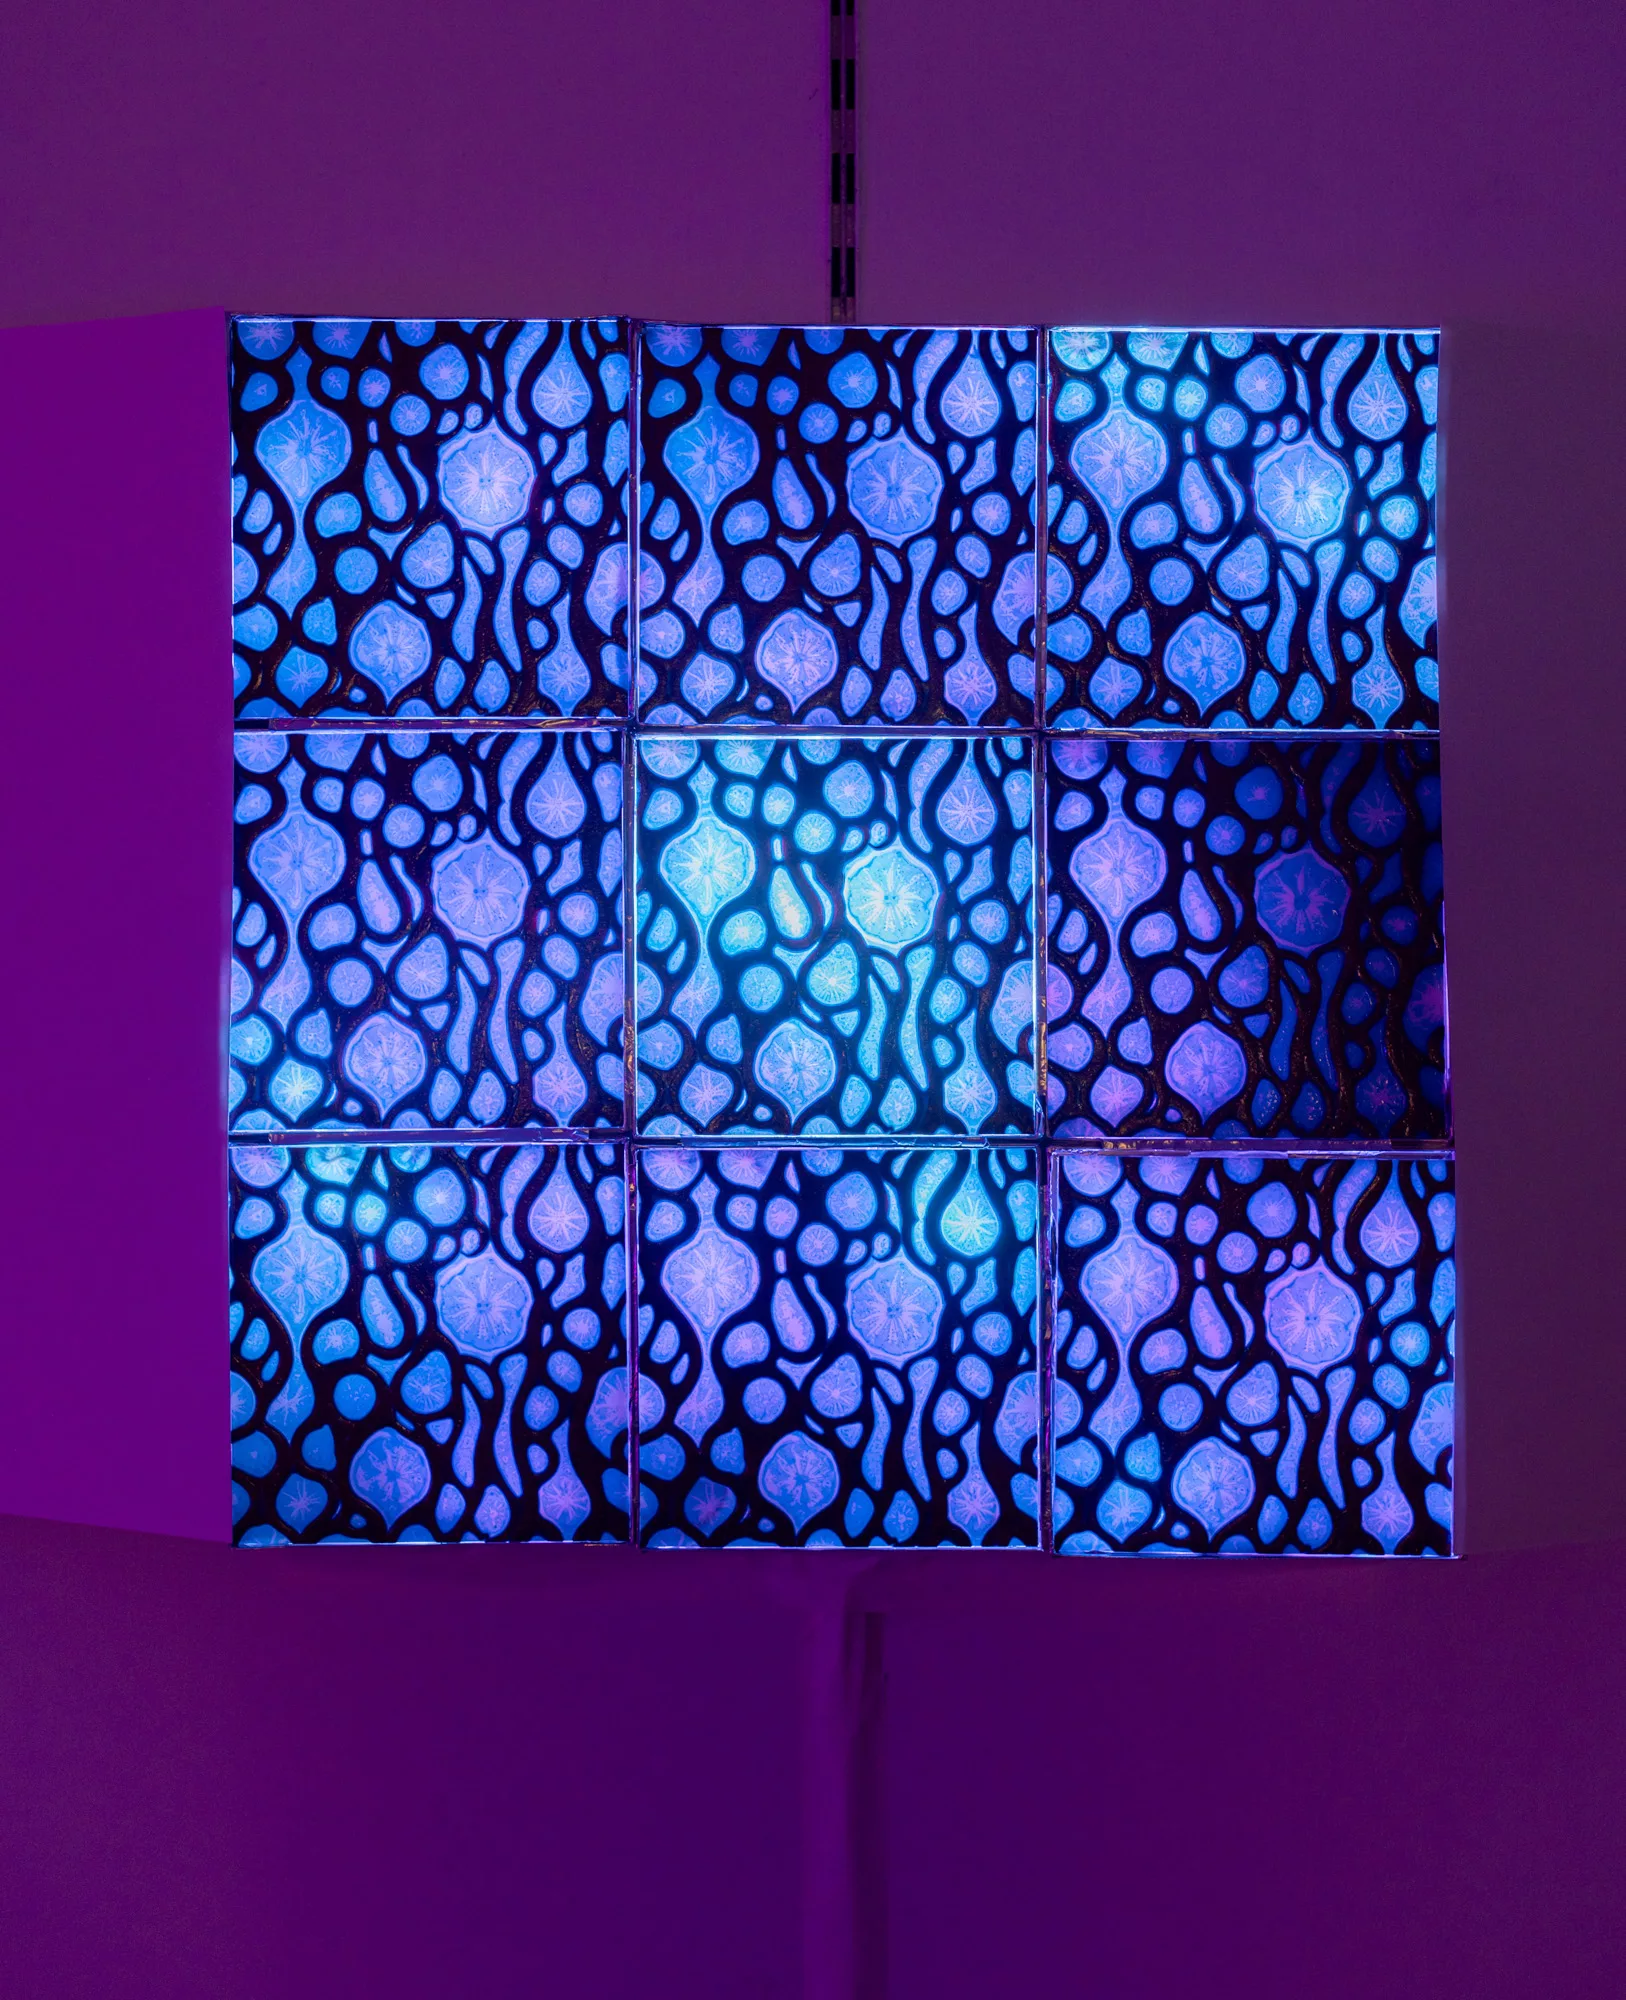 A square of tiles, three rows of three, glow purple and blue. Each tile is patterned with an organic, curving web that obstructs the light.